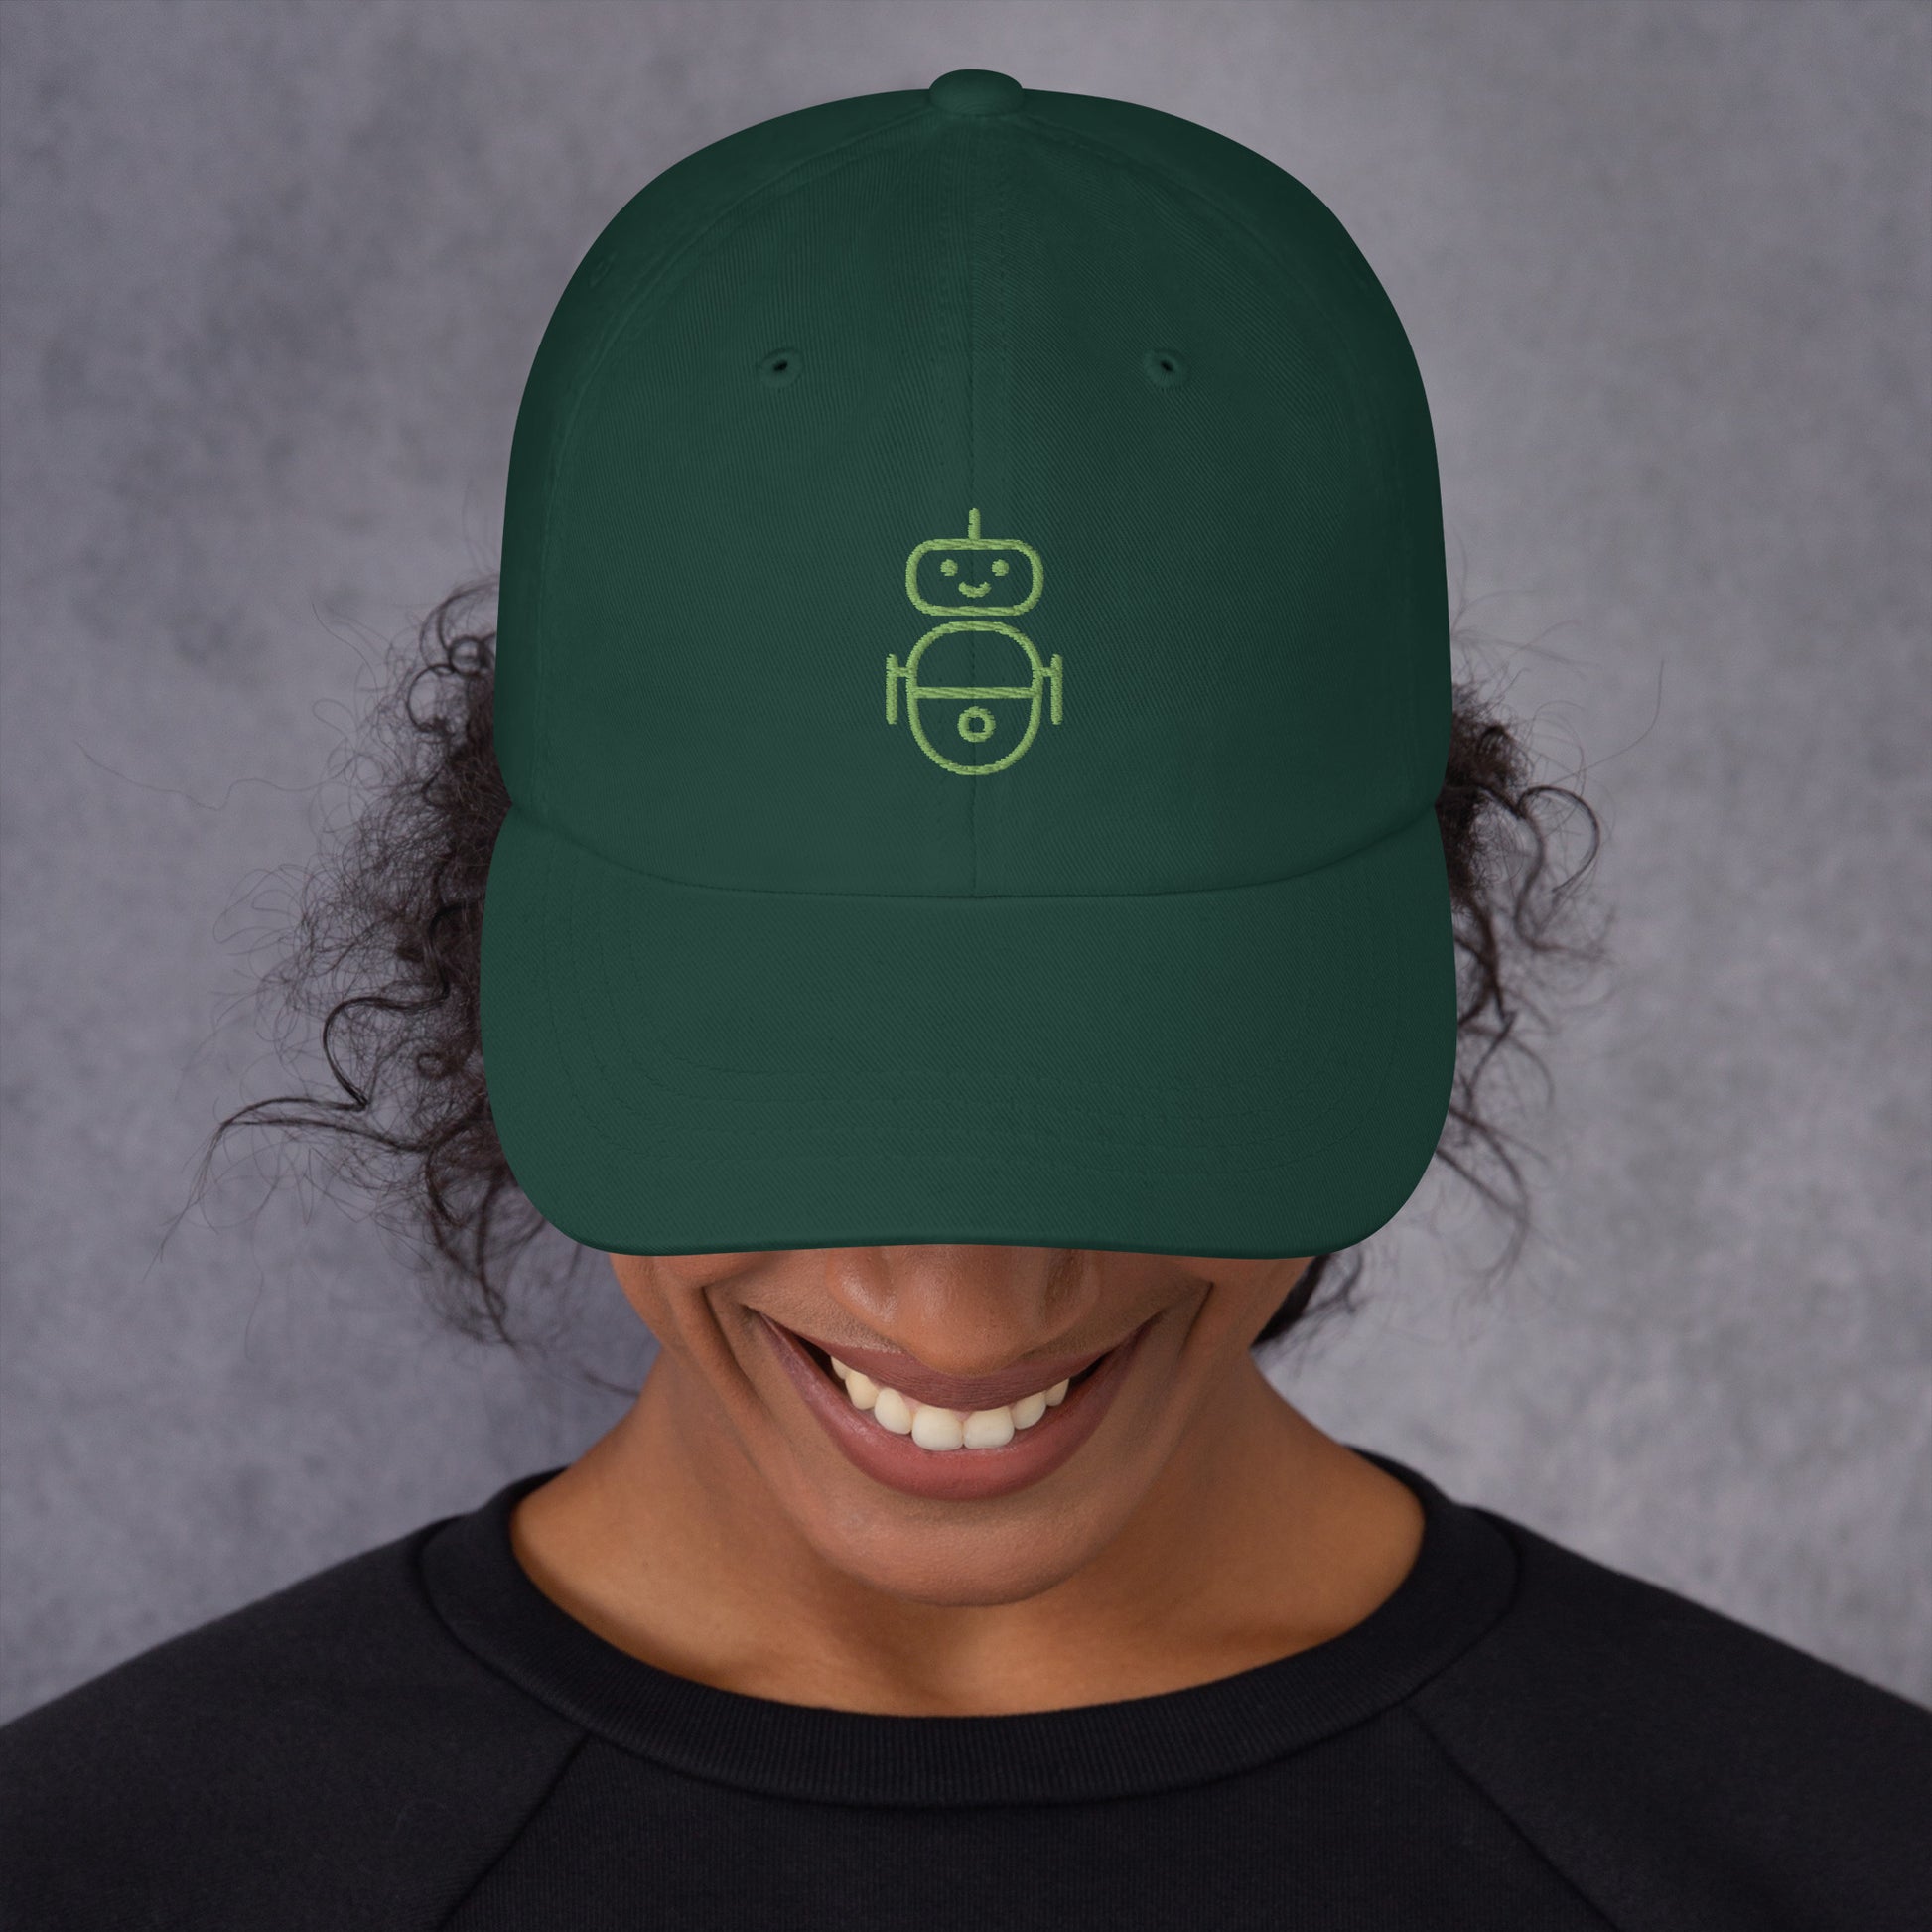 Women with green hat with in green Android logo